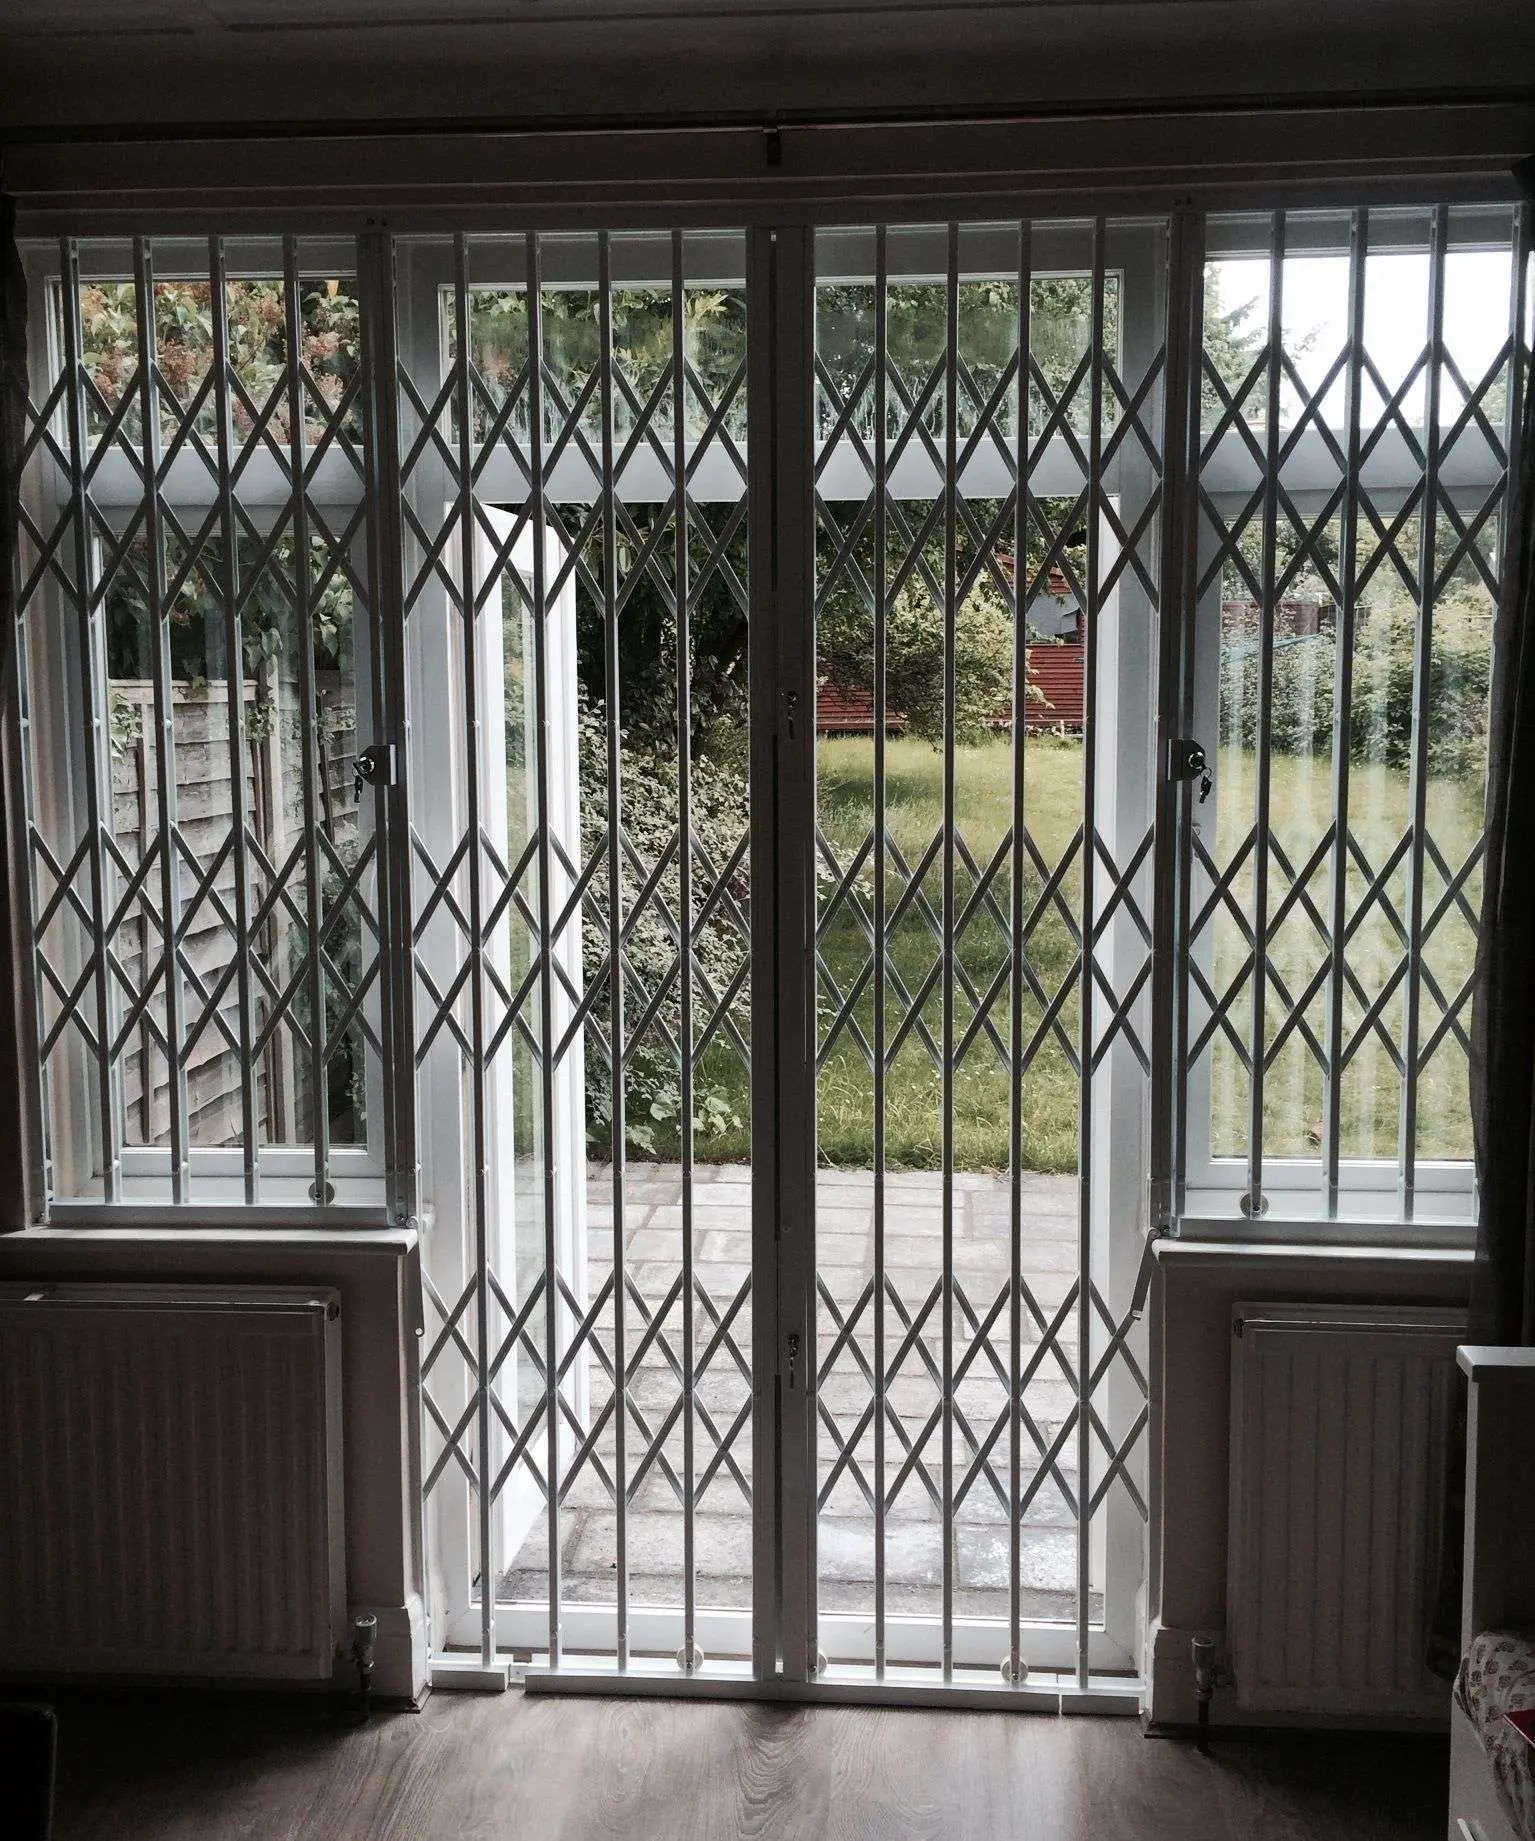 Our RSG1000 retractable security grilles fitted to a patio door with ...